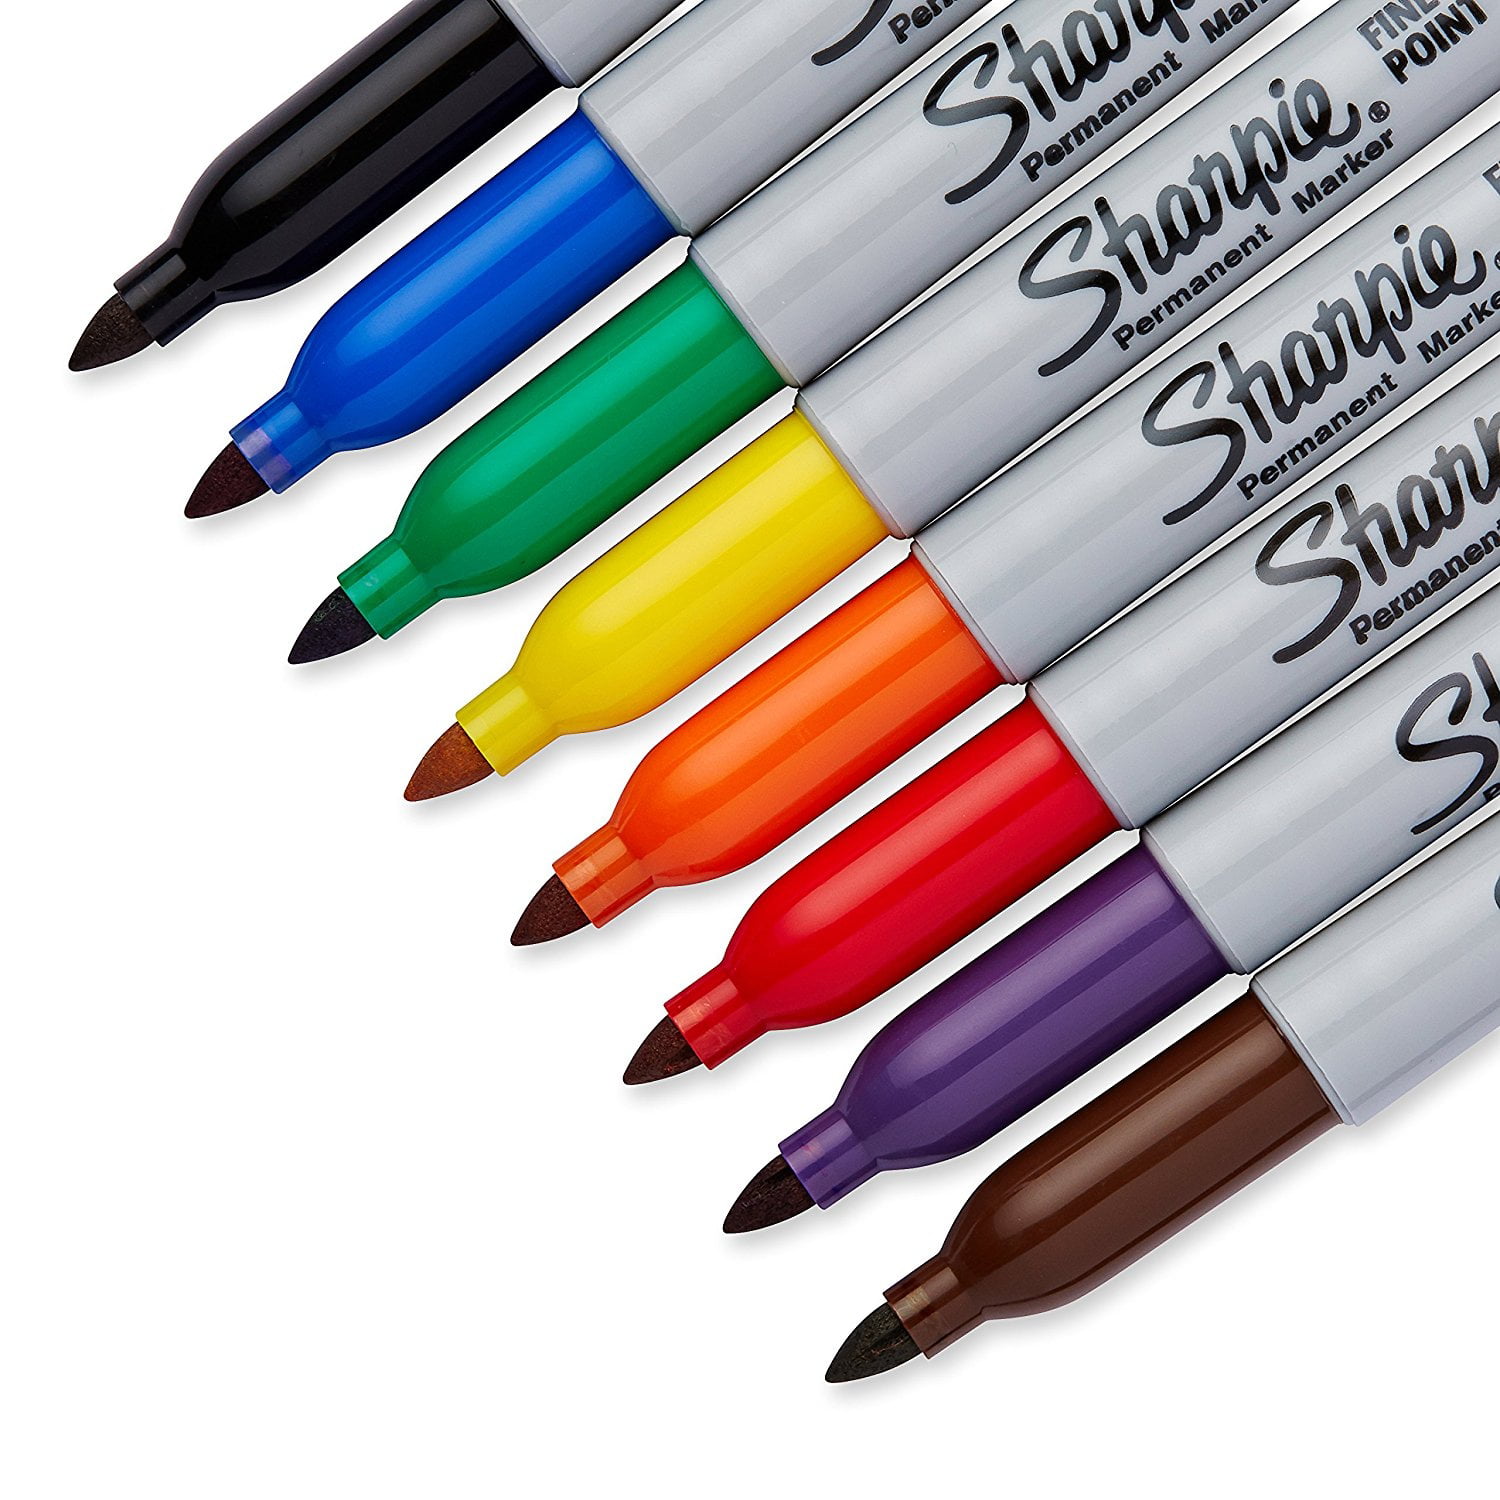 NEW SHARPIE Ultra Fine Point Non-Toxic Permanent Marker Assorted Colors 8 ct